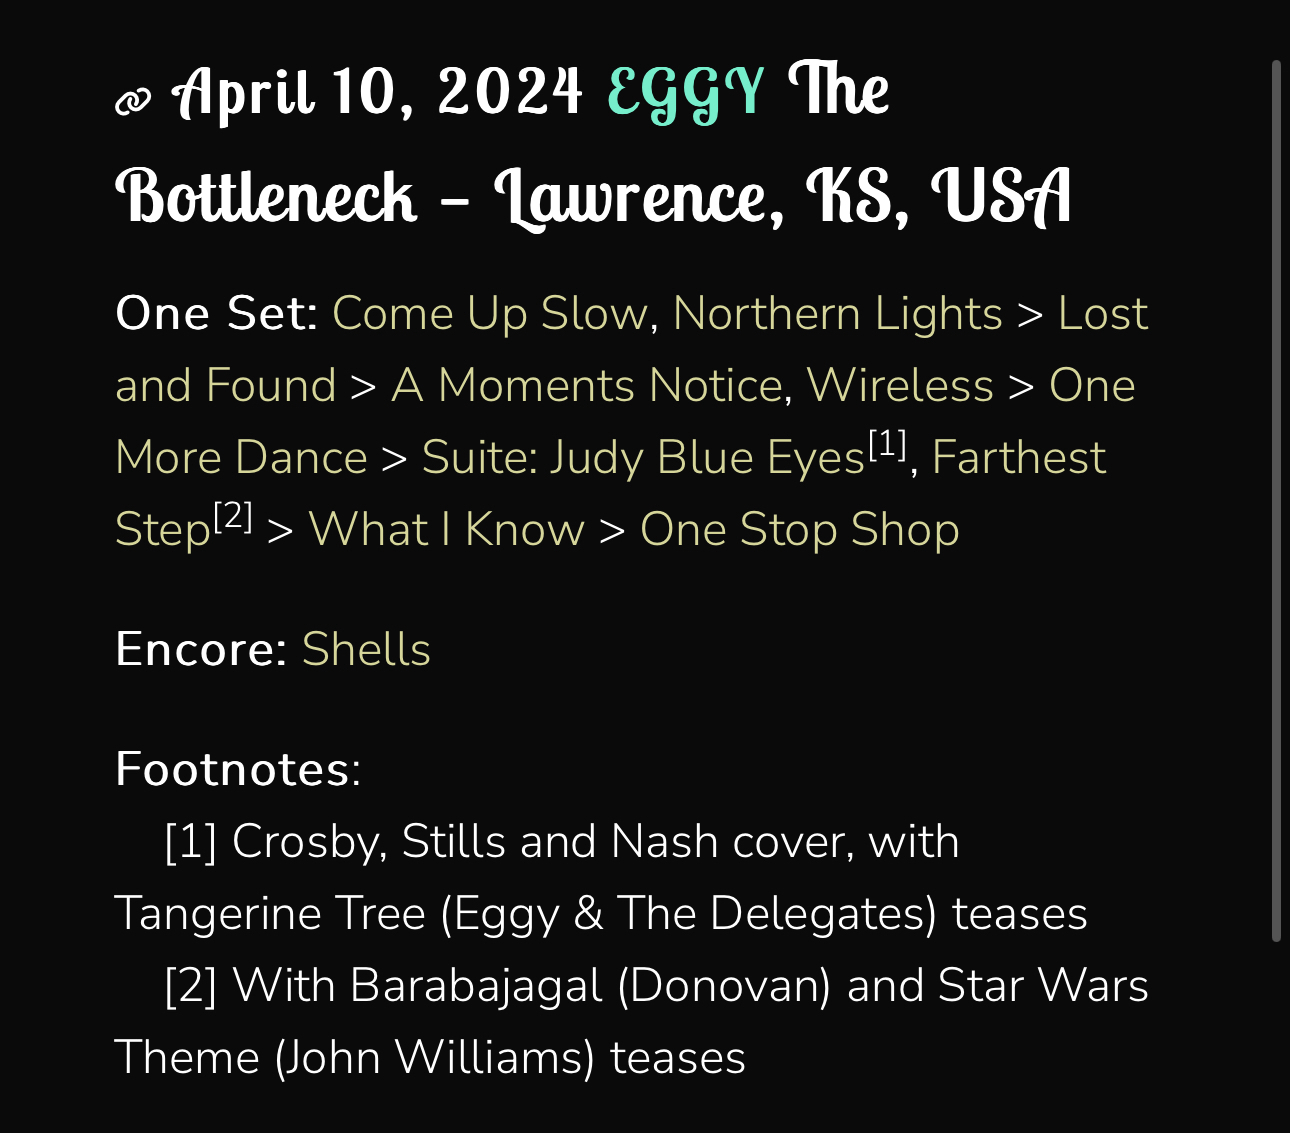 A screenshot displaying a setlist for a performance by the band EGGY on April 10, 2024, at The Bottleneck in Lawrence, KS, USA. The setlist includes various song titles such as “Come Up Slow” and